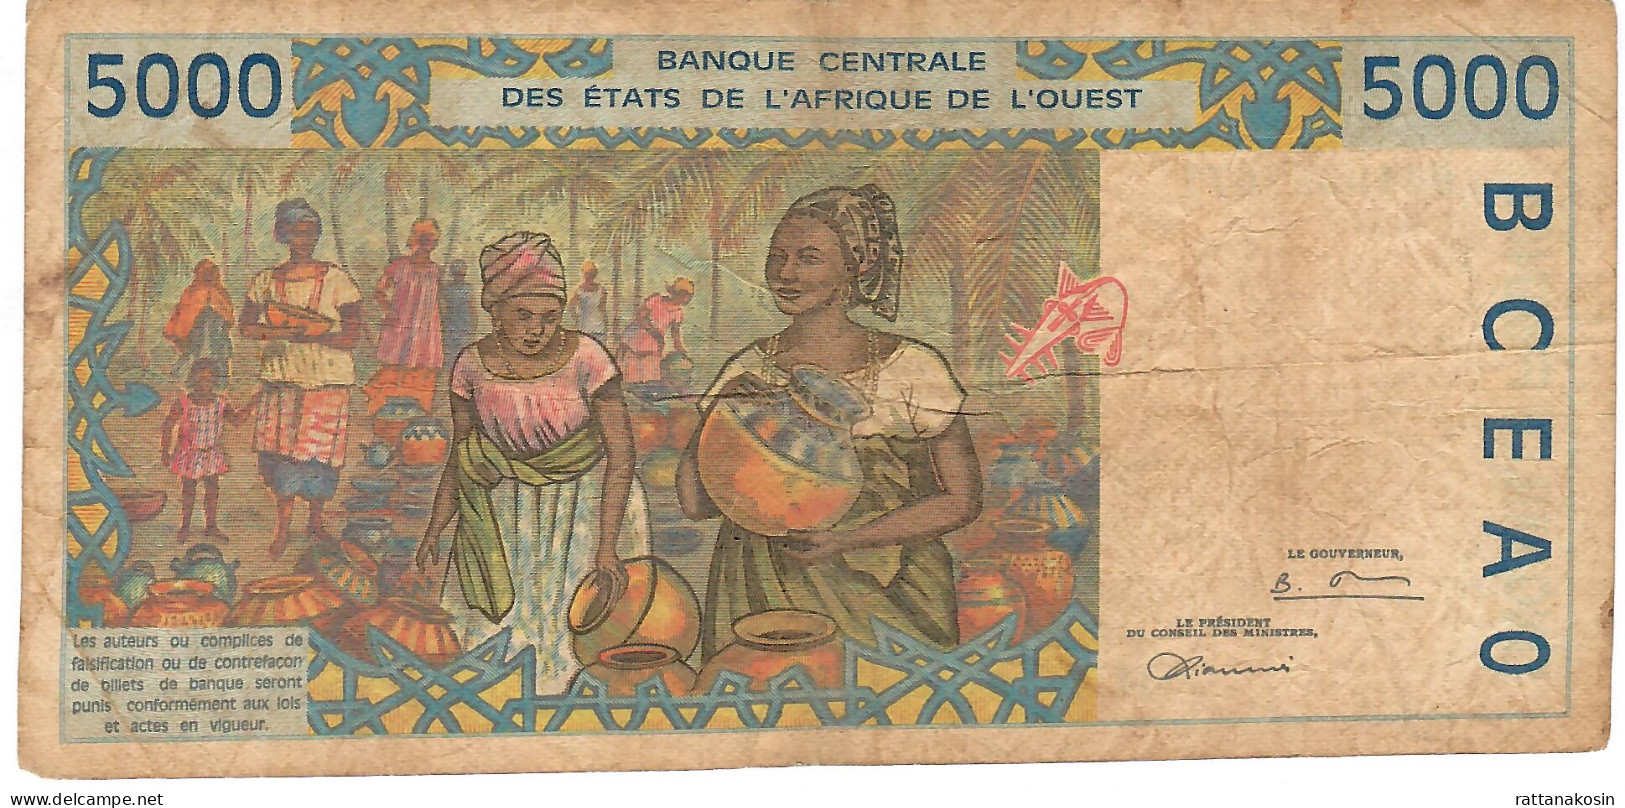 W.A.S. NIGER    P613Hd 5000 FRANCS (19)96 1996  Signature 28  FINE - West African States